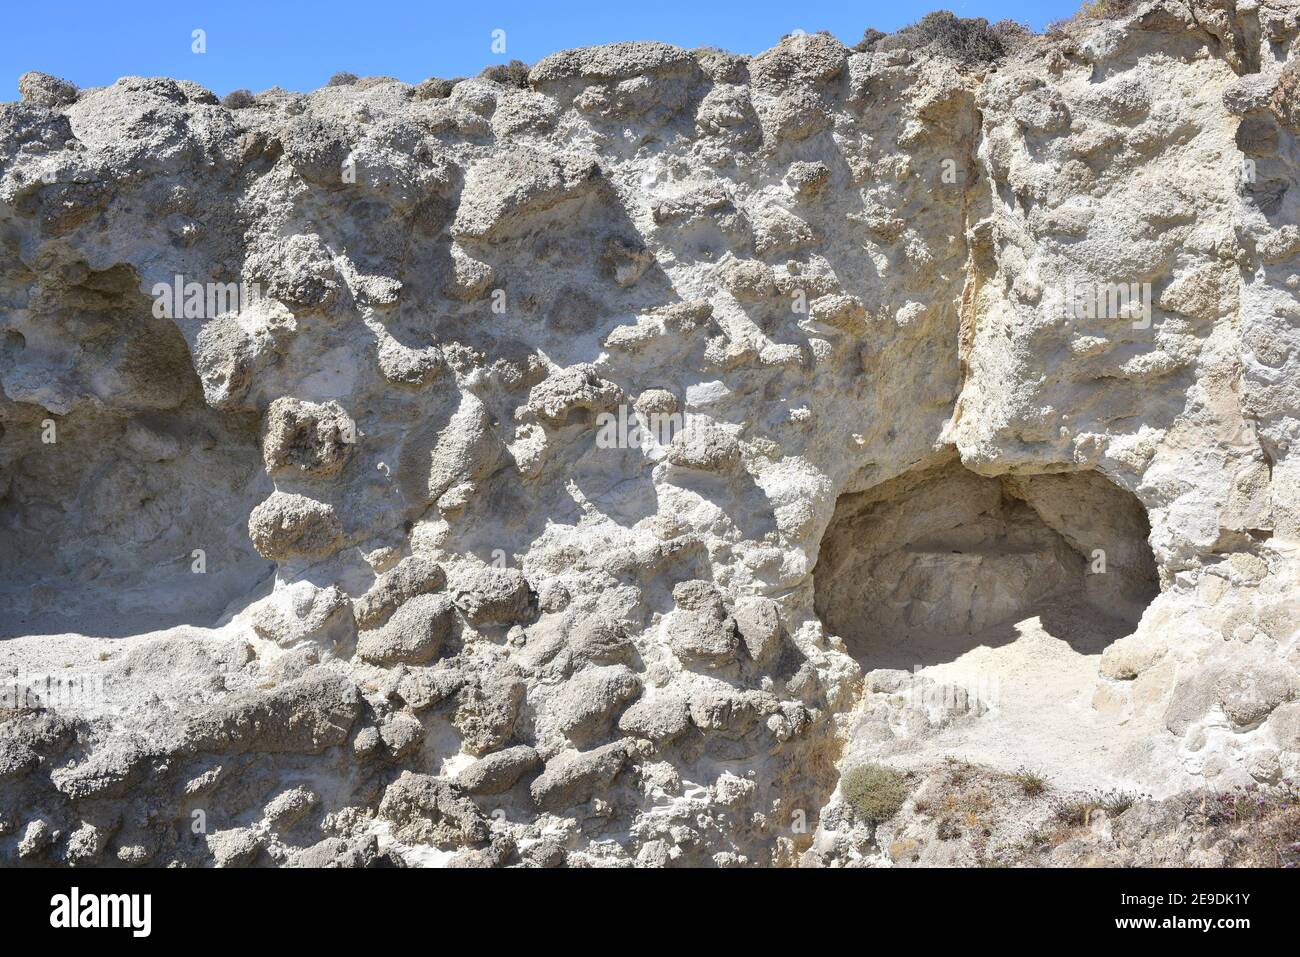 Volcanic coast with pyroclasts. Papafragas, Milos or Melos Island, Greece. Stock Photo